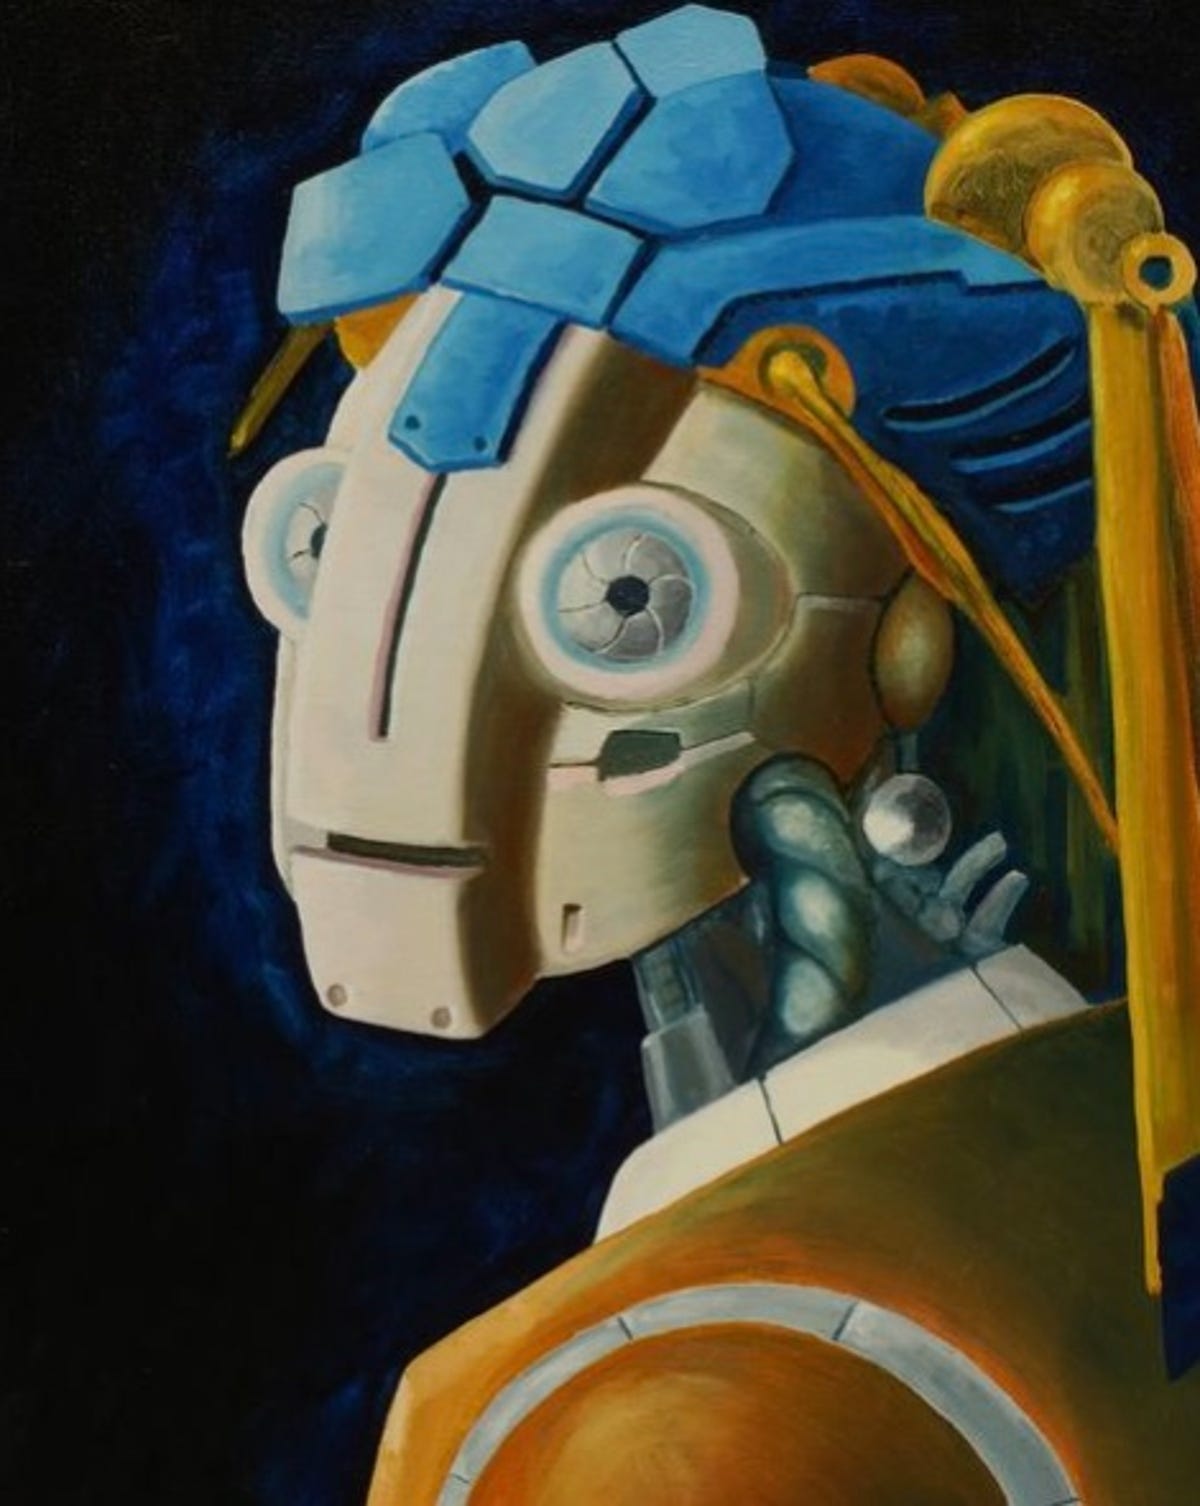 A girl with a pearl earring in which a robot appears instead of a girl